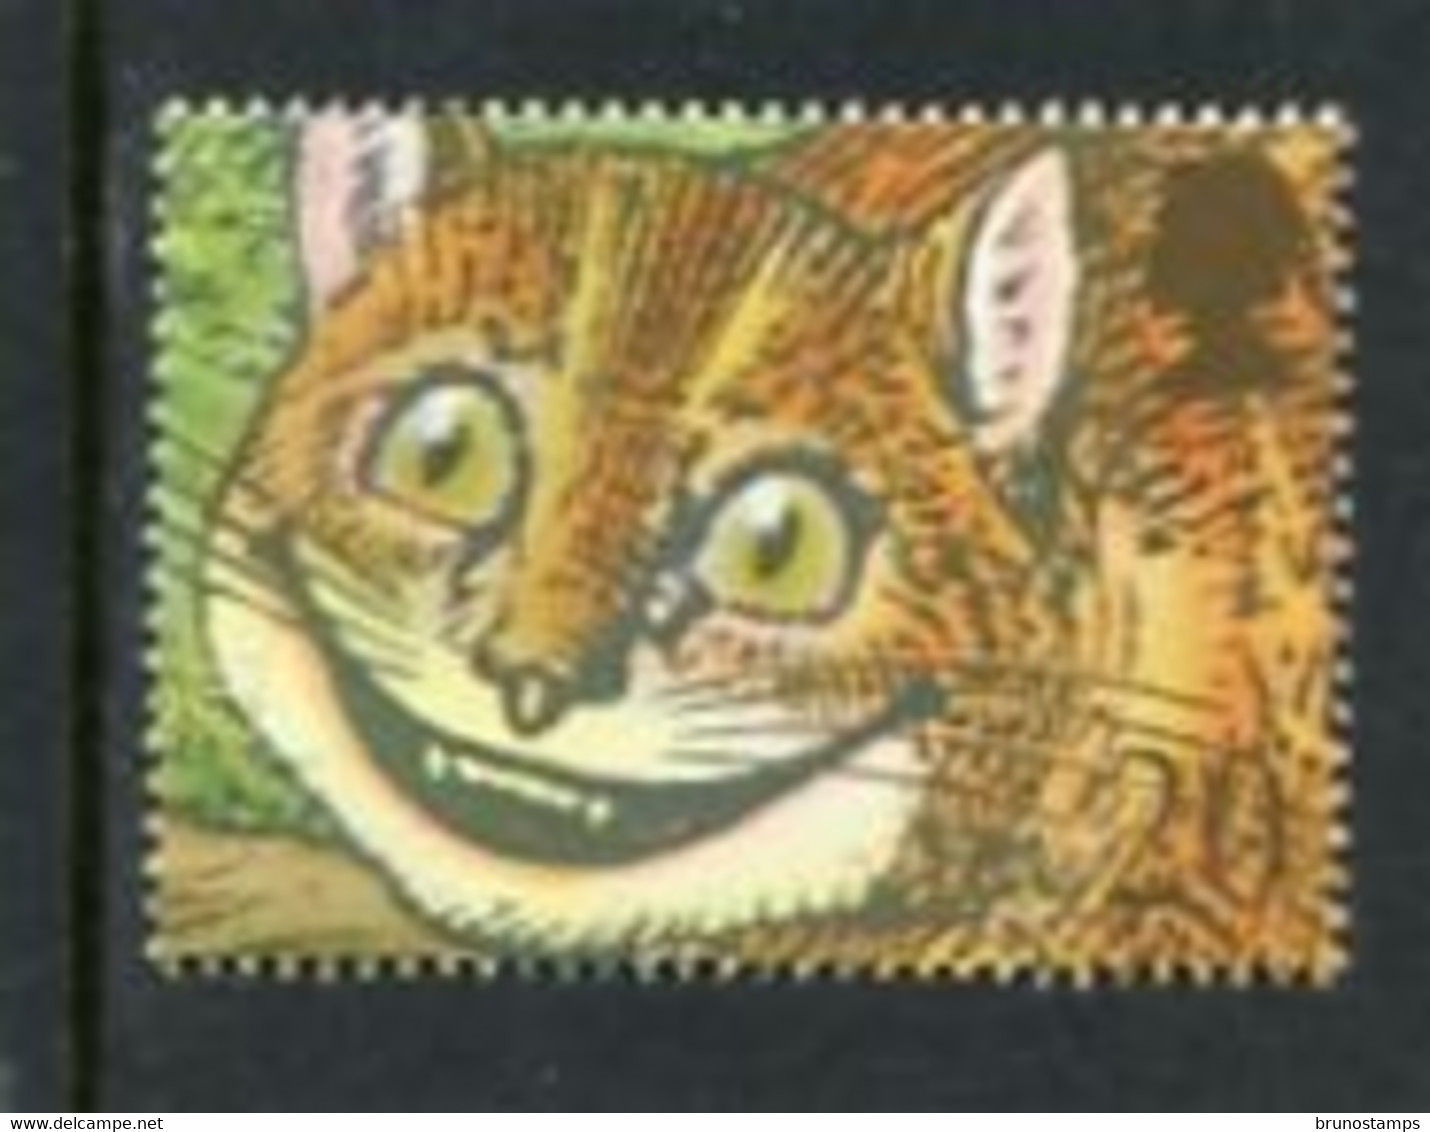 GREAT BRITAIN - 1990  CHESIRE CAT  MINT NH - Unclassified